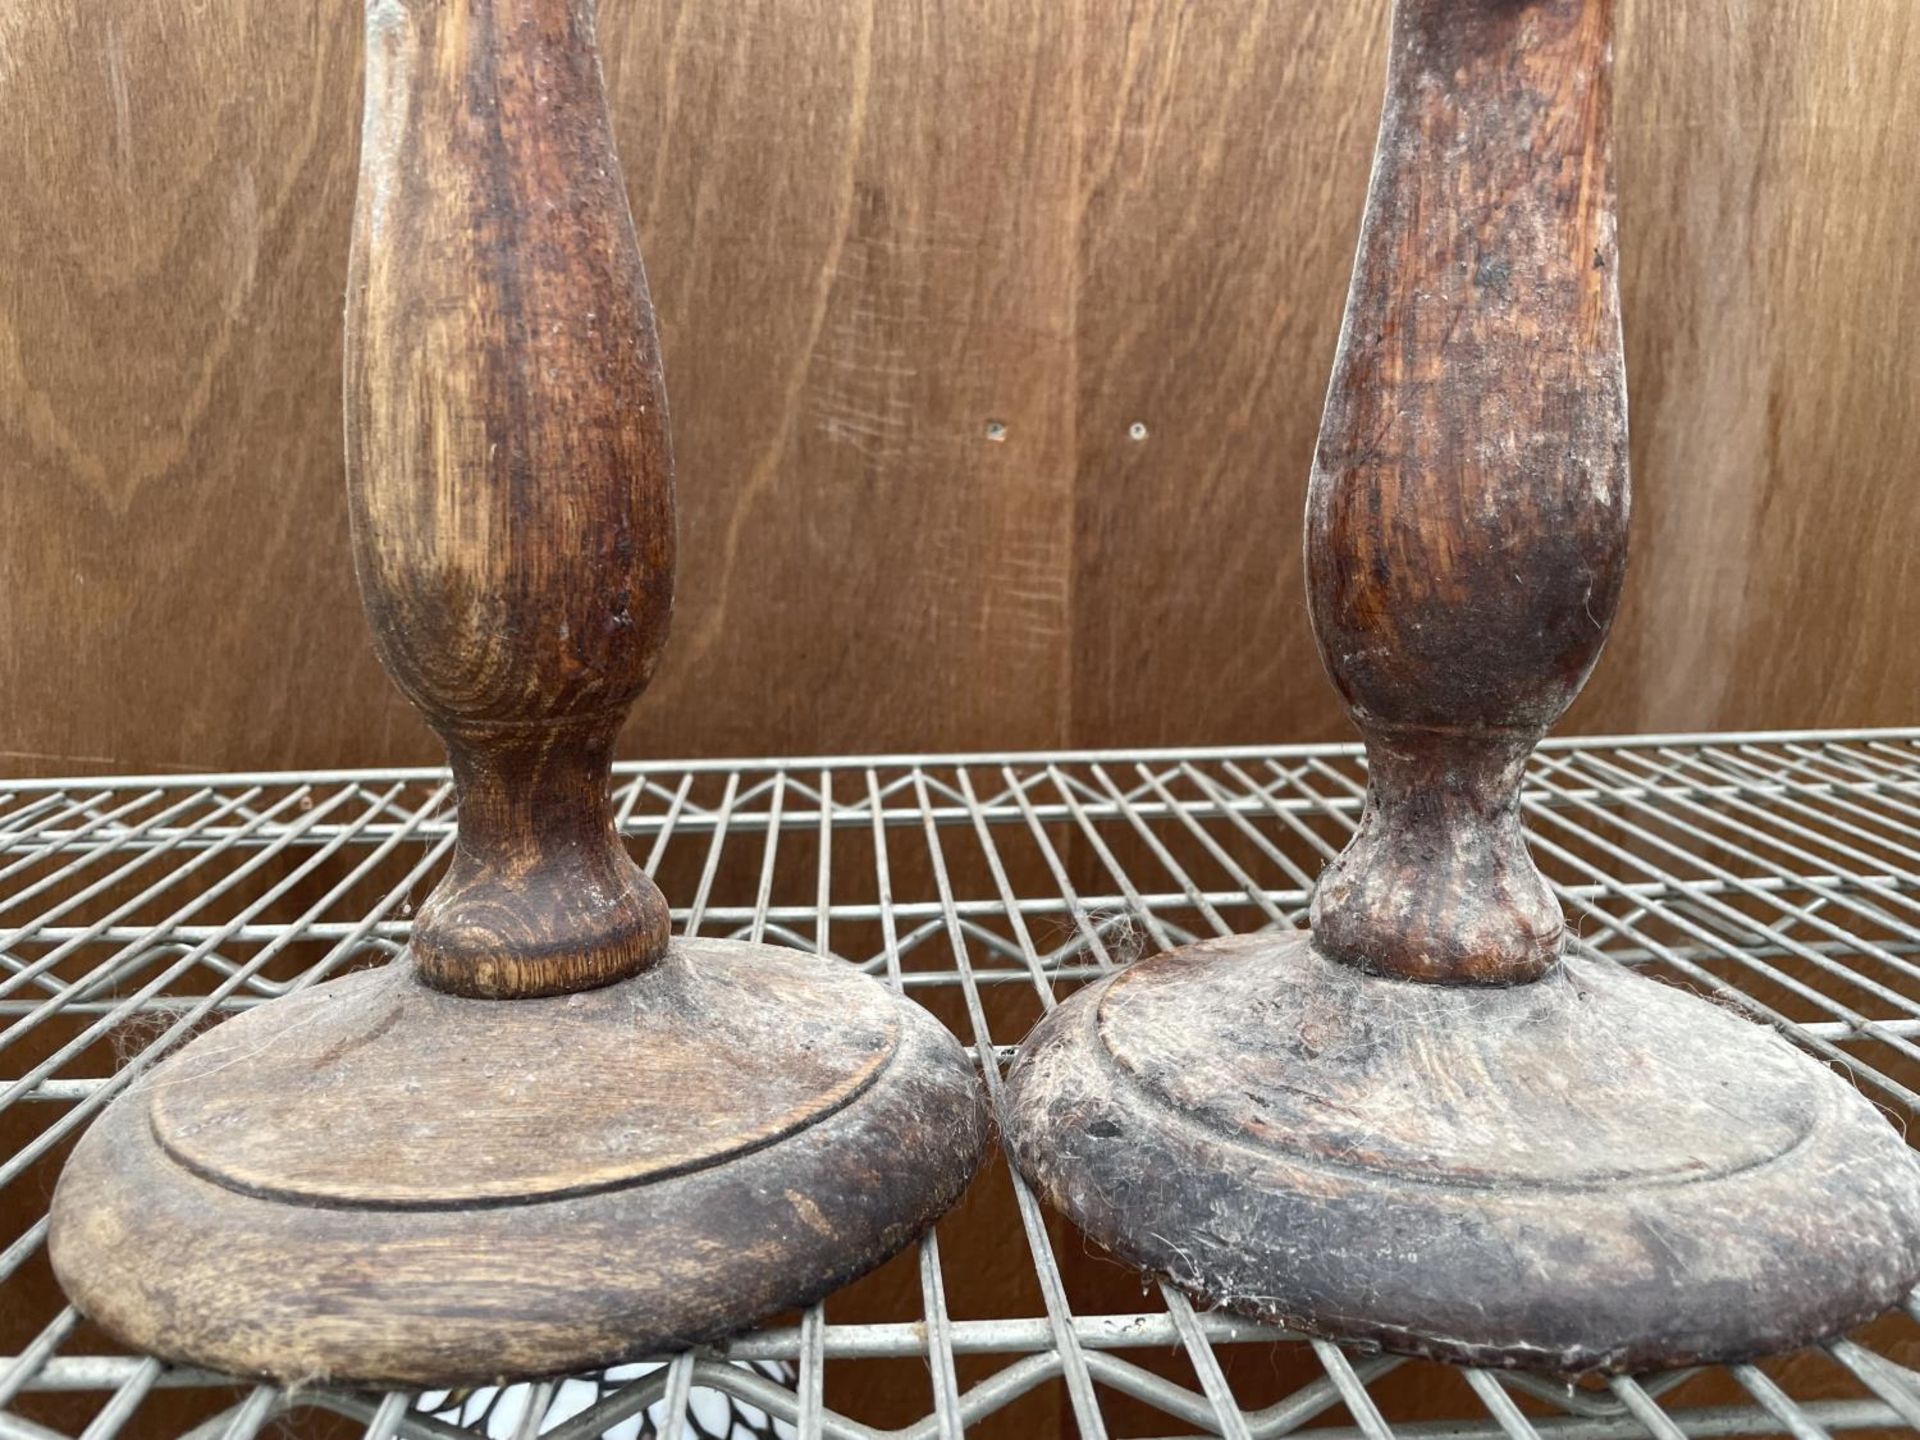 A PAIR OF CARVED WOODEN CANDLESTICKS WITH INSET FLORAL DESIGN - Image 2 of 3